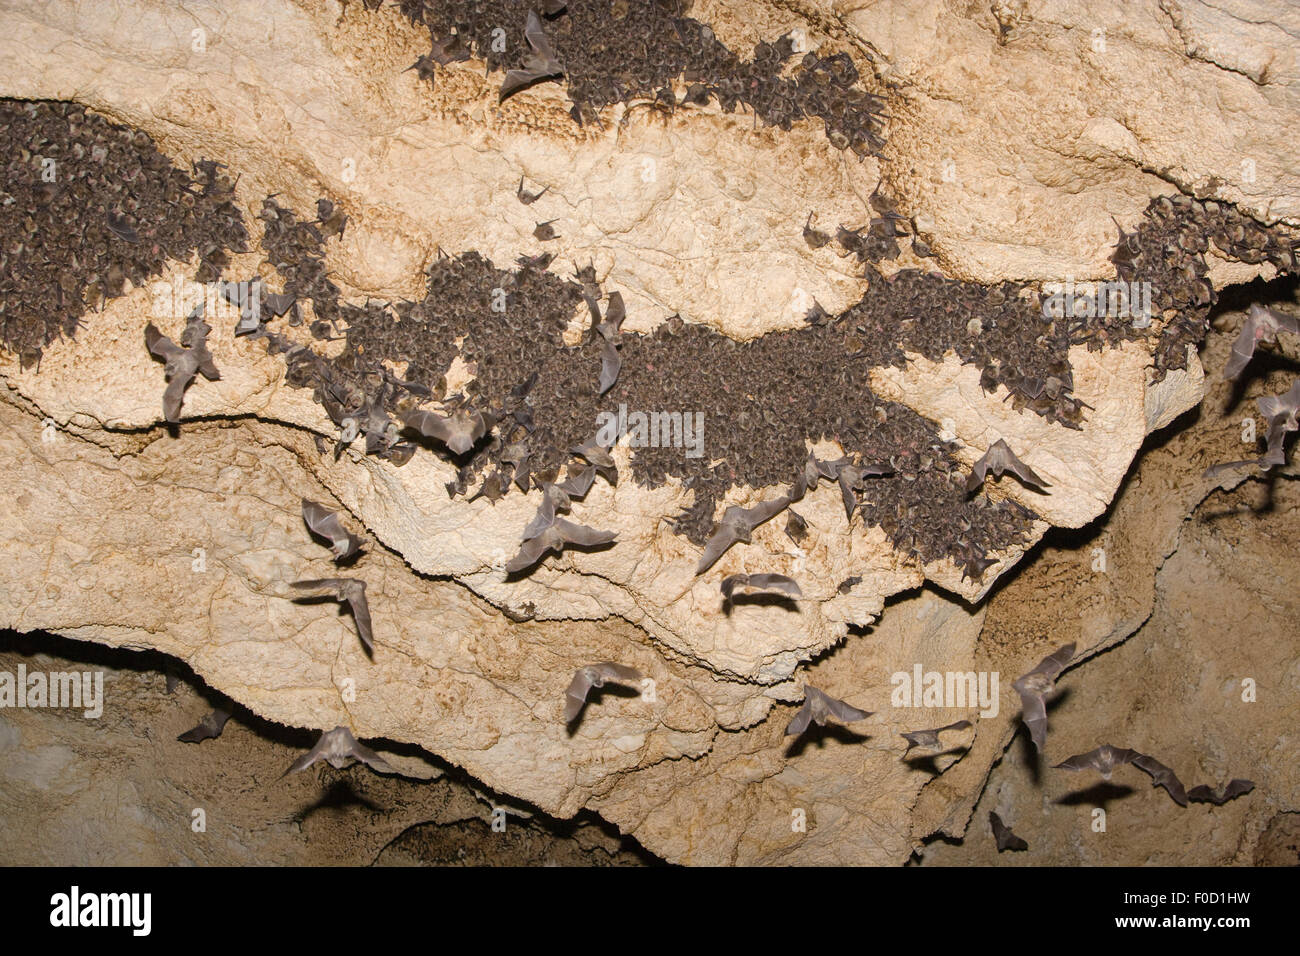 Mouse-eared bats (Myotis sp) and Schreiber's long fingered bats (Miniopterus schreibersi) flying from roost in cave, Bulgaria, May 2008 Stock Photo